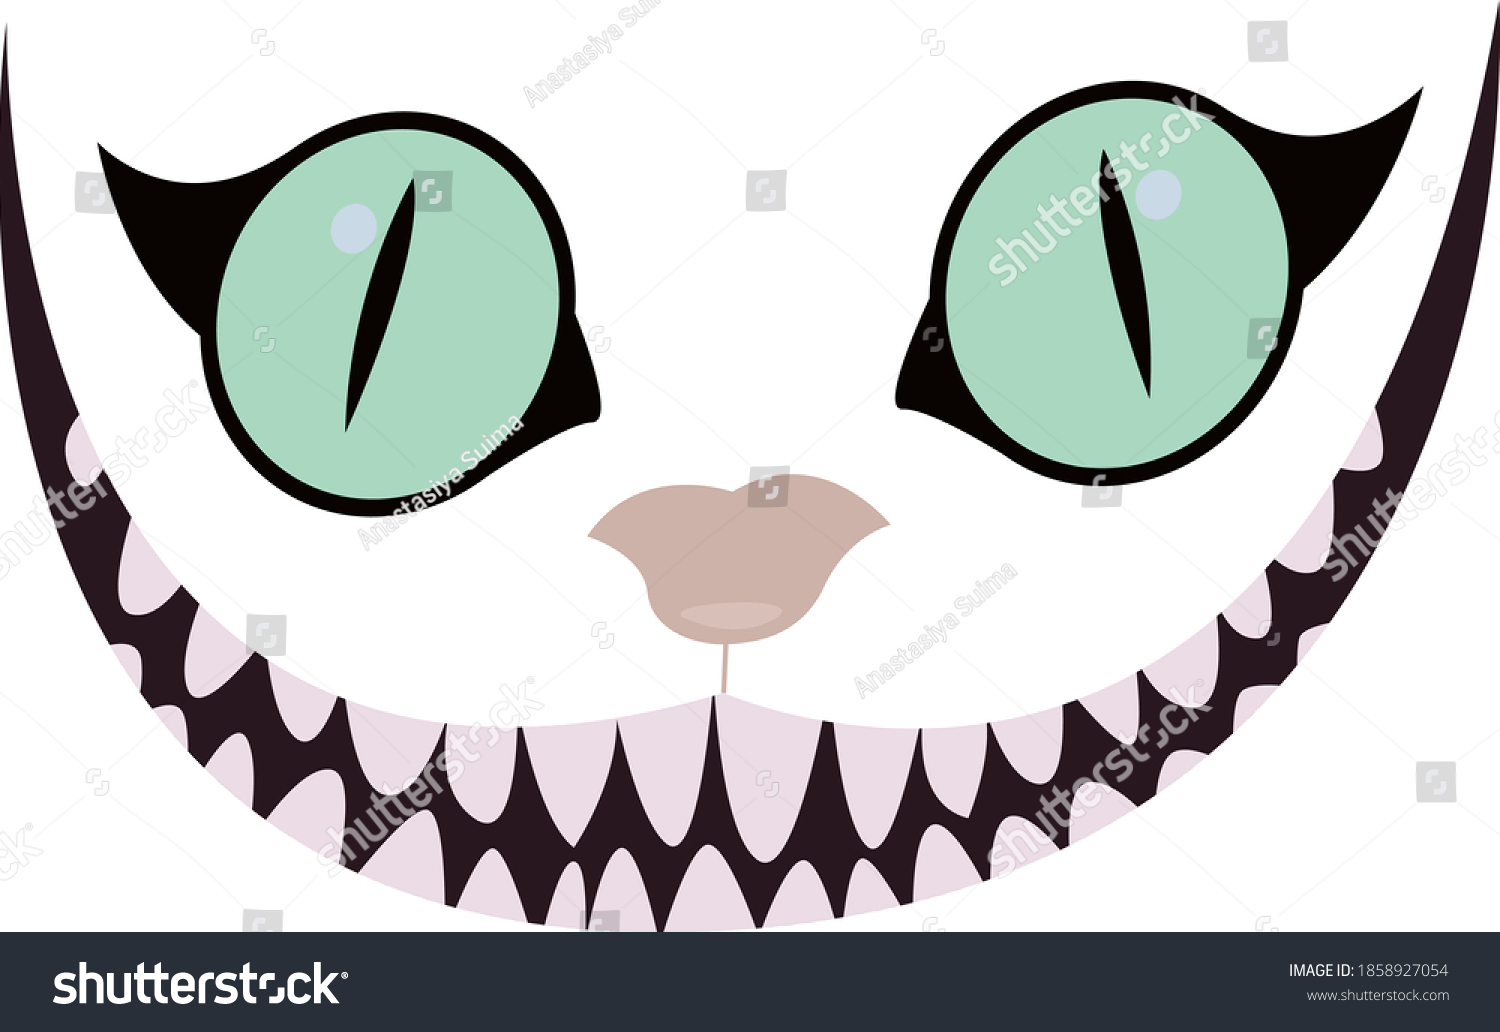 SVG of vector illustration, smile, Cheshire cat, eyes, teeth, mouth. Alice in Wonderland. The face of the cat. The head of a cat with a big mustache. Cheshire cat smile.  svg